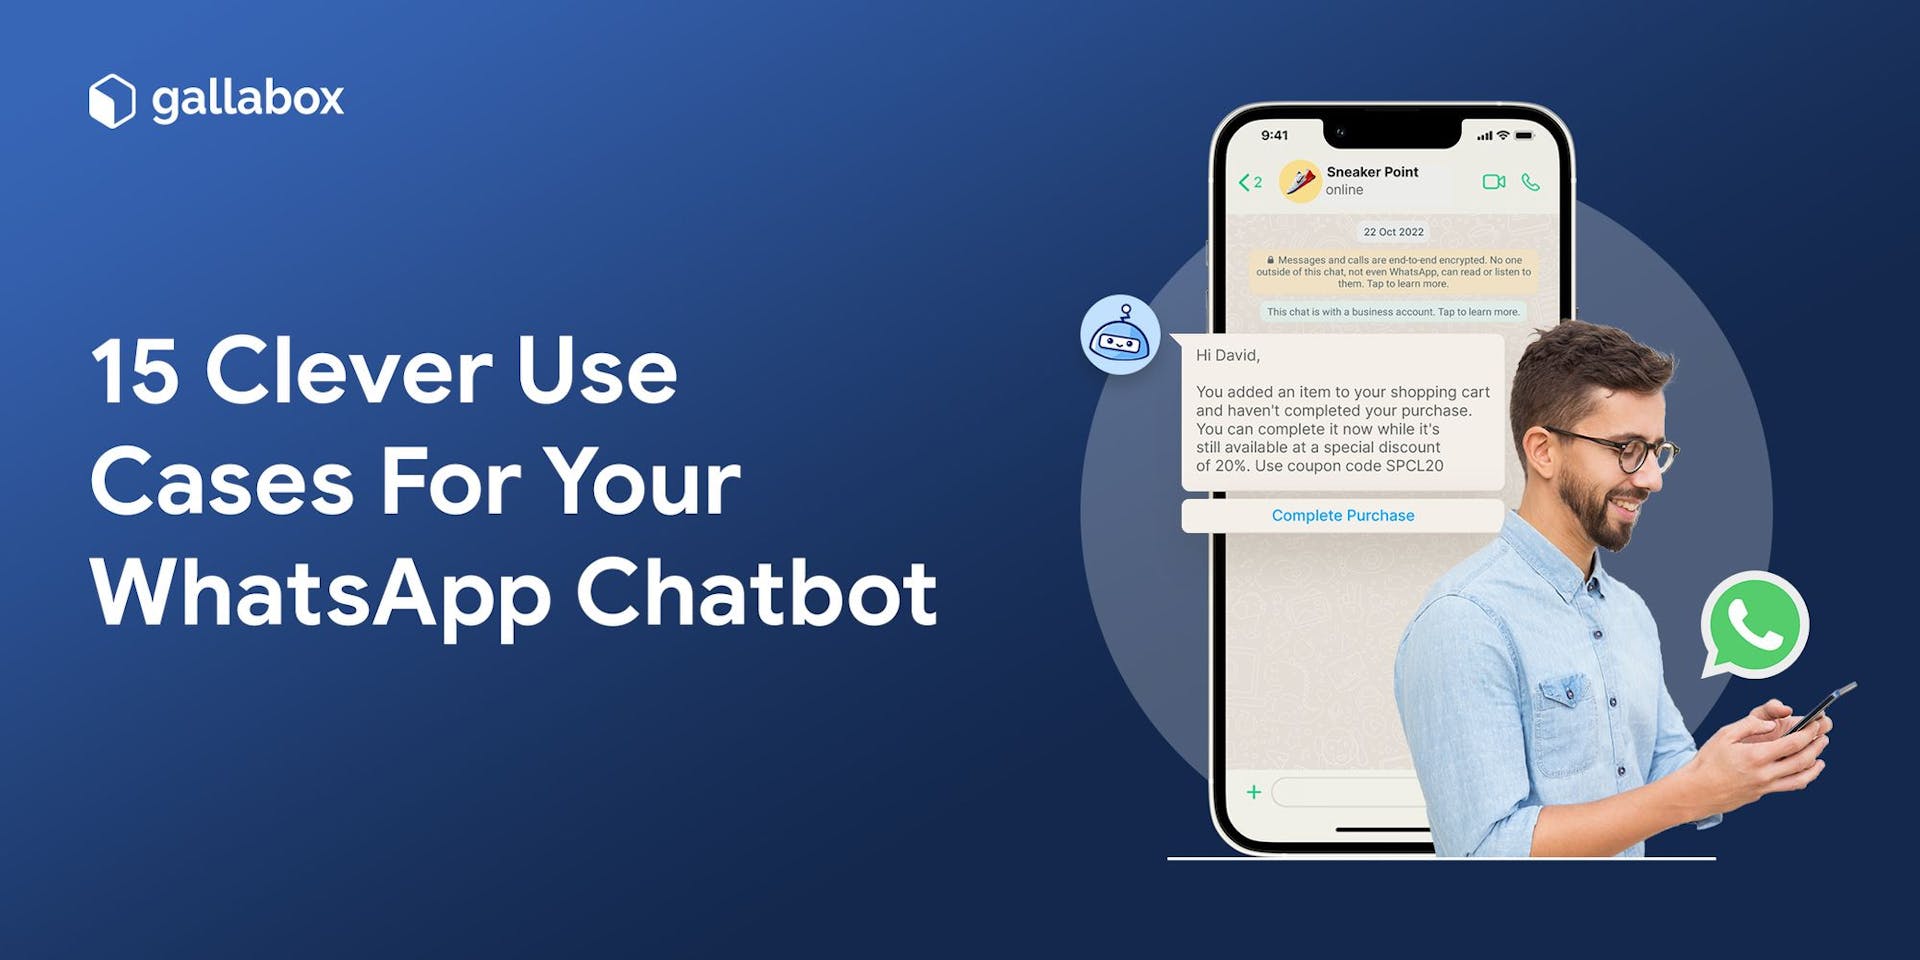 15 Clever Use Cases For Your WhatsApp Chatbot